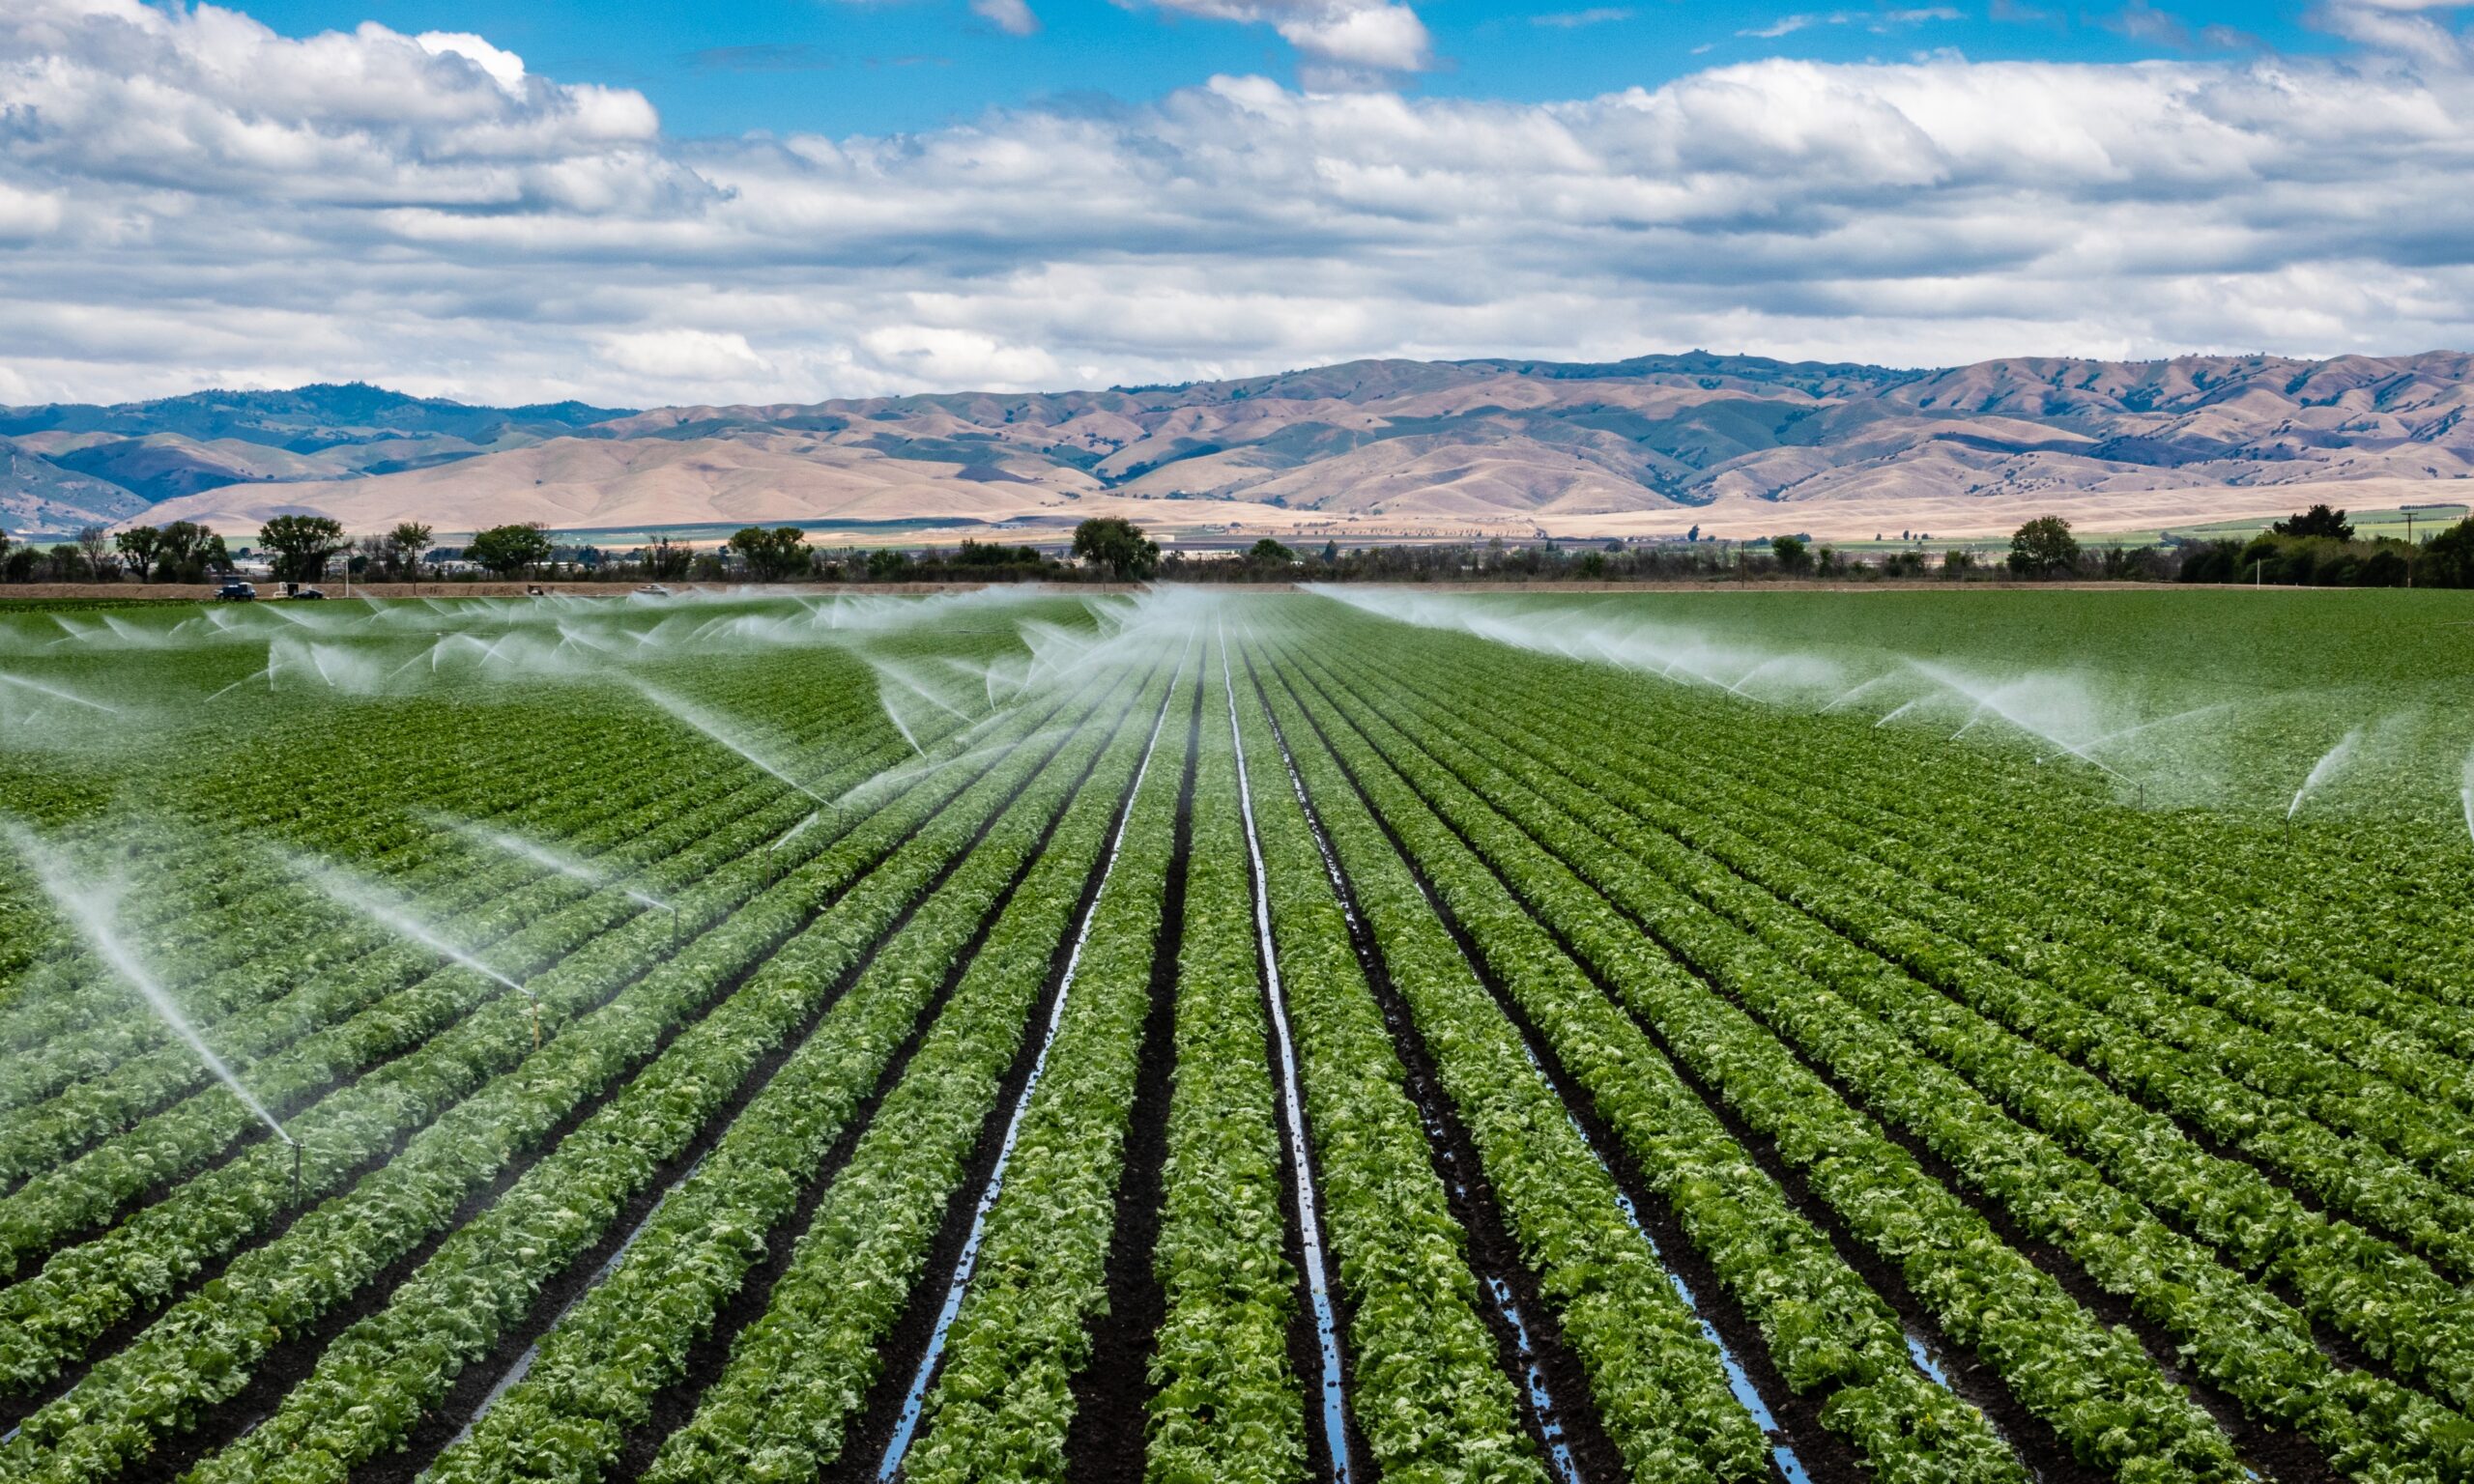 A large field of romaine lettuce in California - set against a blue sky with clouds. Irrigation is spraying water across the lettuce.